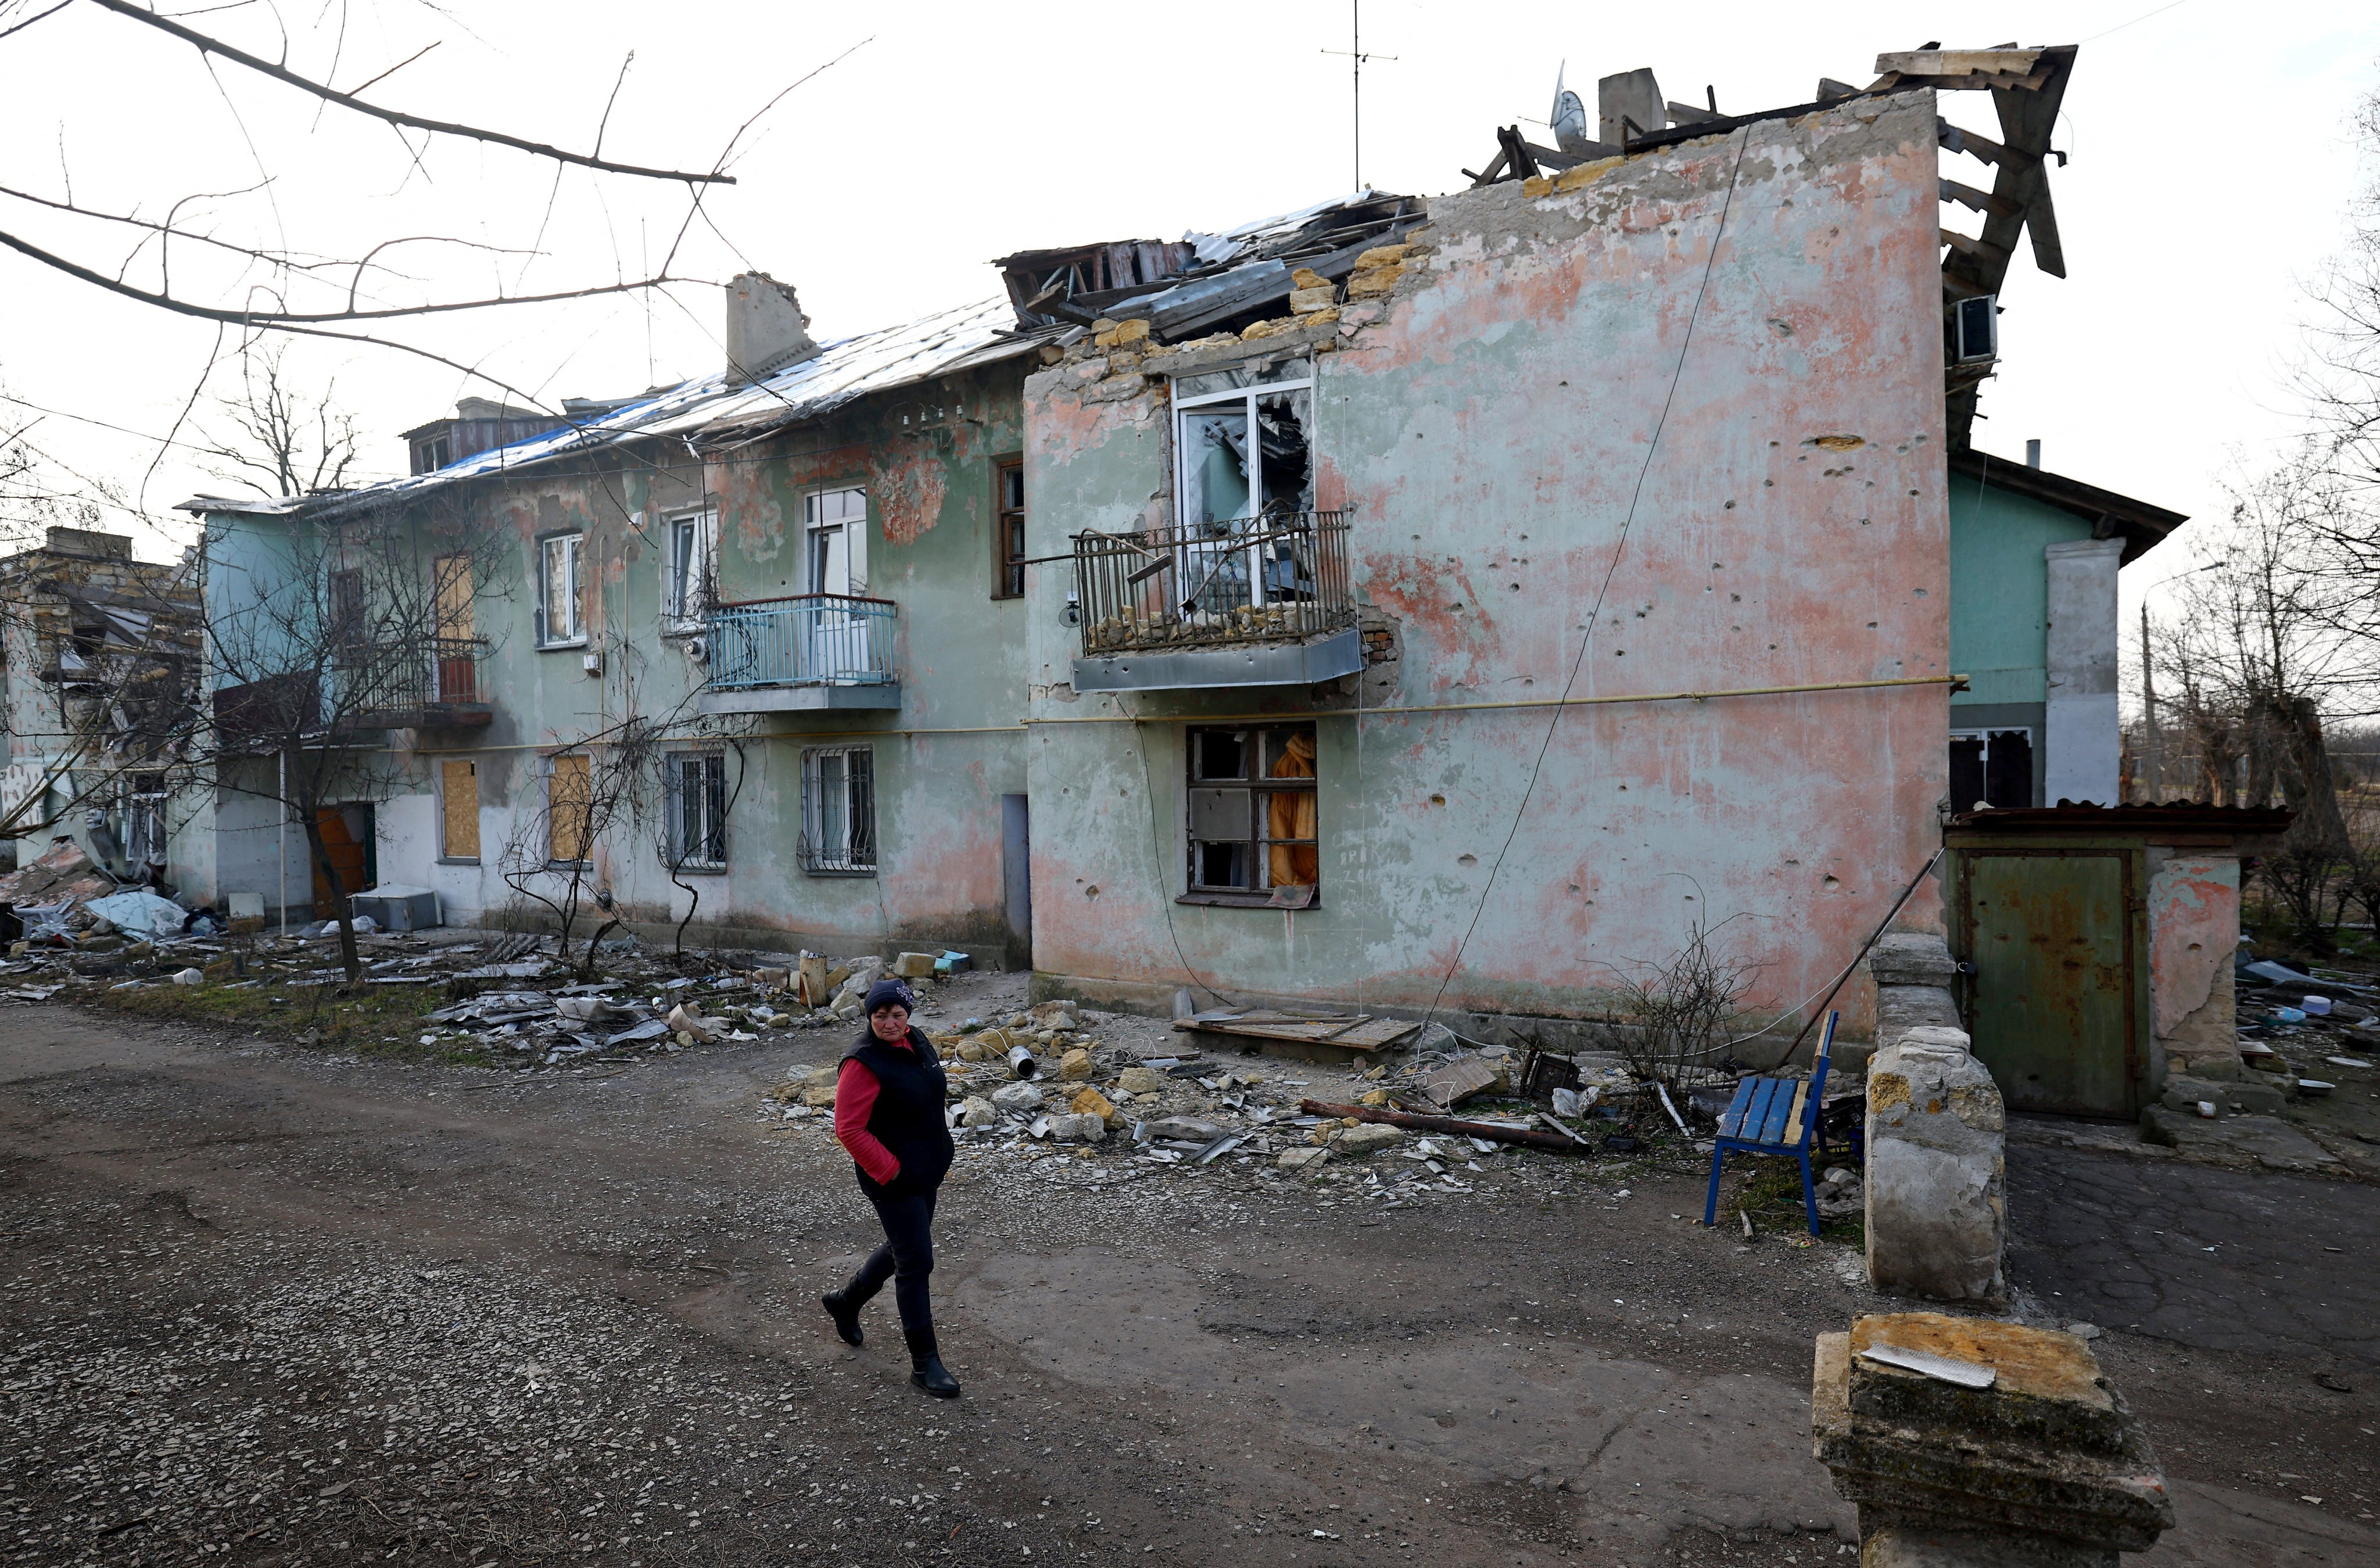 Ukrainian Svitlana Gynzhul walks in front of a damaged house in her village, devastated by shelling at the beginning of Russia’s invasion of Ukraine, in Luch, Mykolaiv region, Ukraine, on February 25. The world is simmering with conflict and resentment. All that’s missing to spark wider war is a trigger. Photo: Reuters